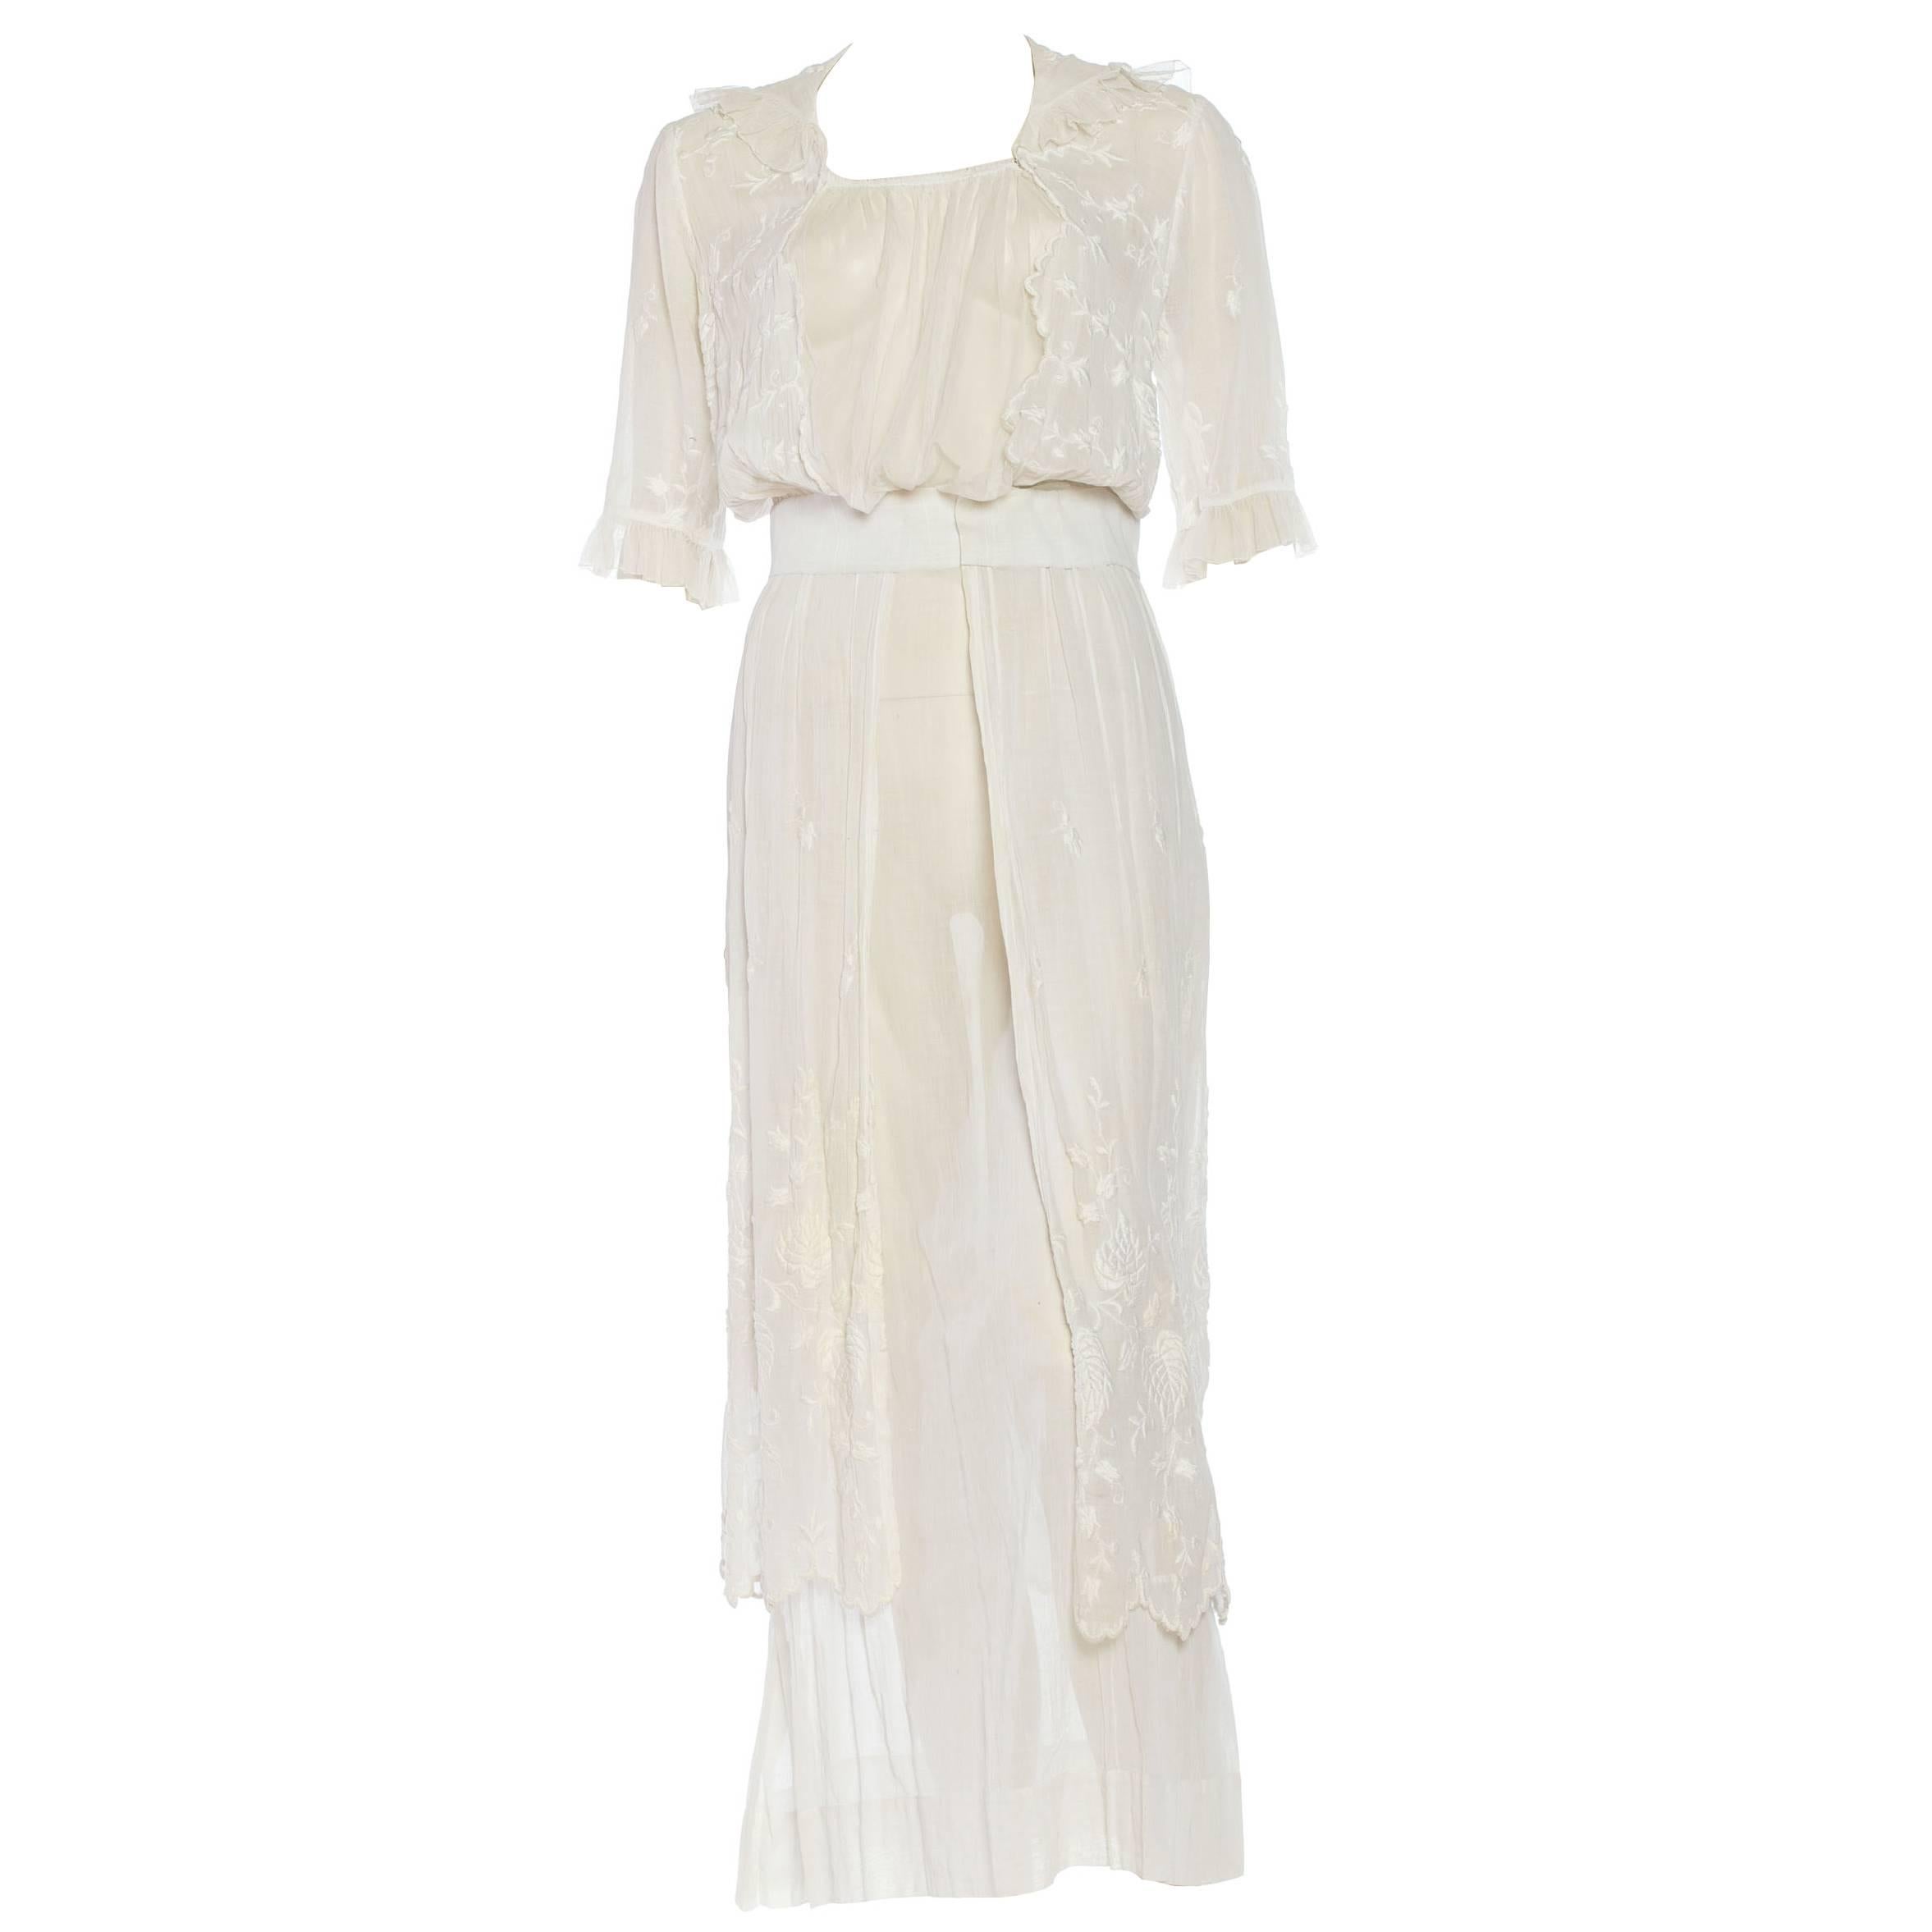 1910S White Embroidered Cotton Voile Edwardian Tea Dress With Sleeves For Sale